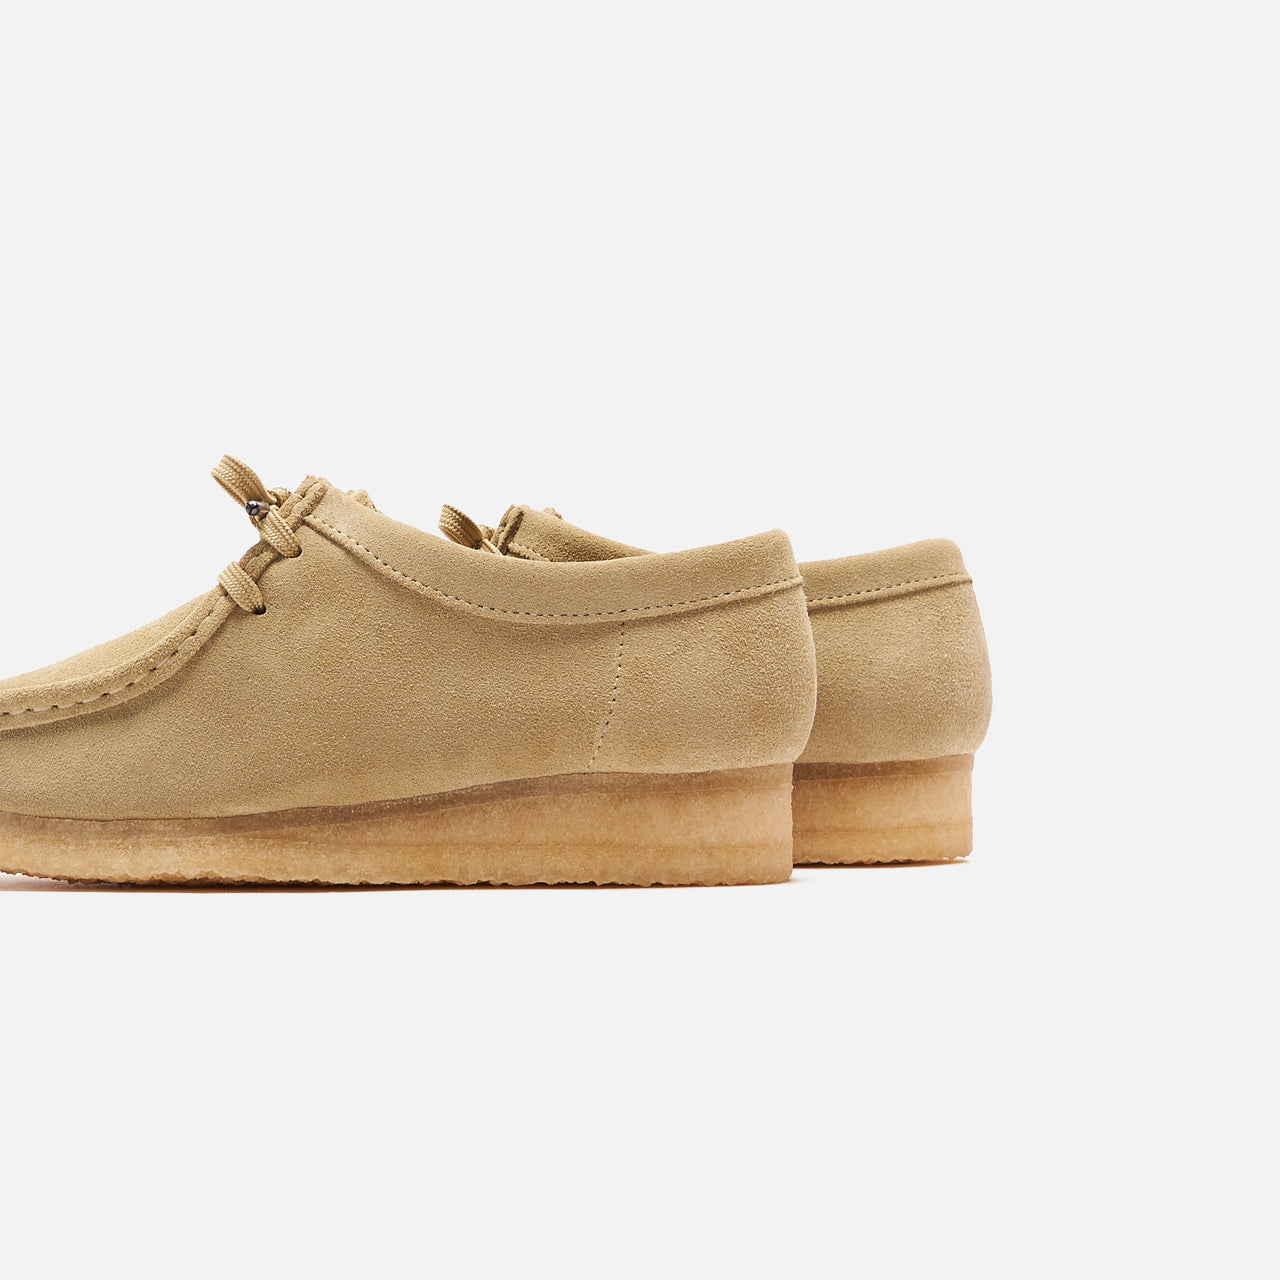 Stylish and comfortable Clarks Originals Wallabee Low Men's Maple Suede 26155515 shoes